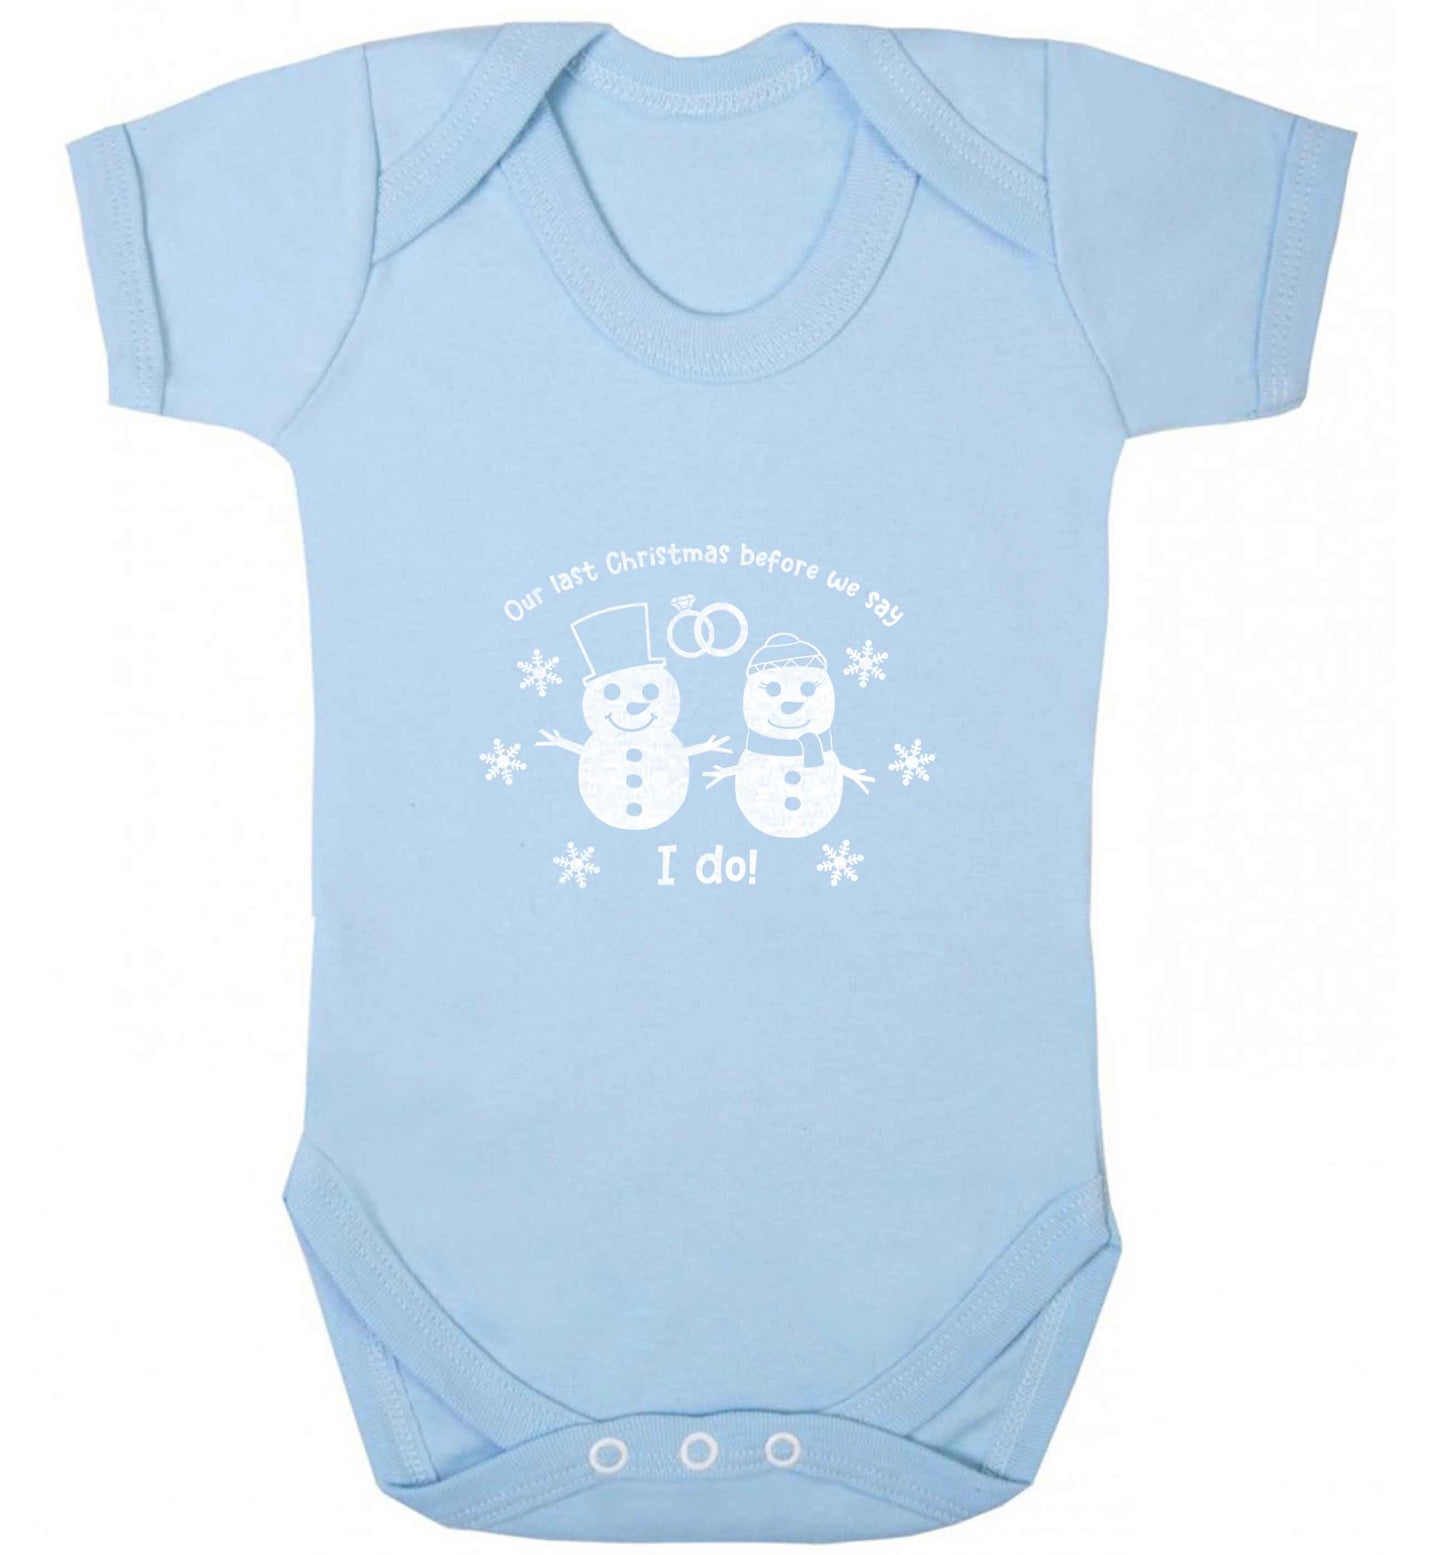 Last Christmas before we say I do baby vest pale blue 18-24 months